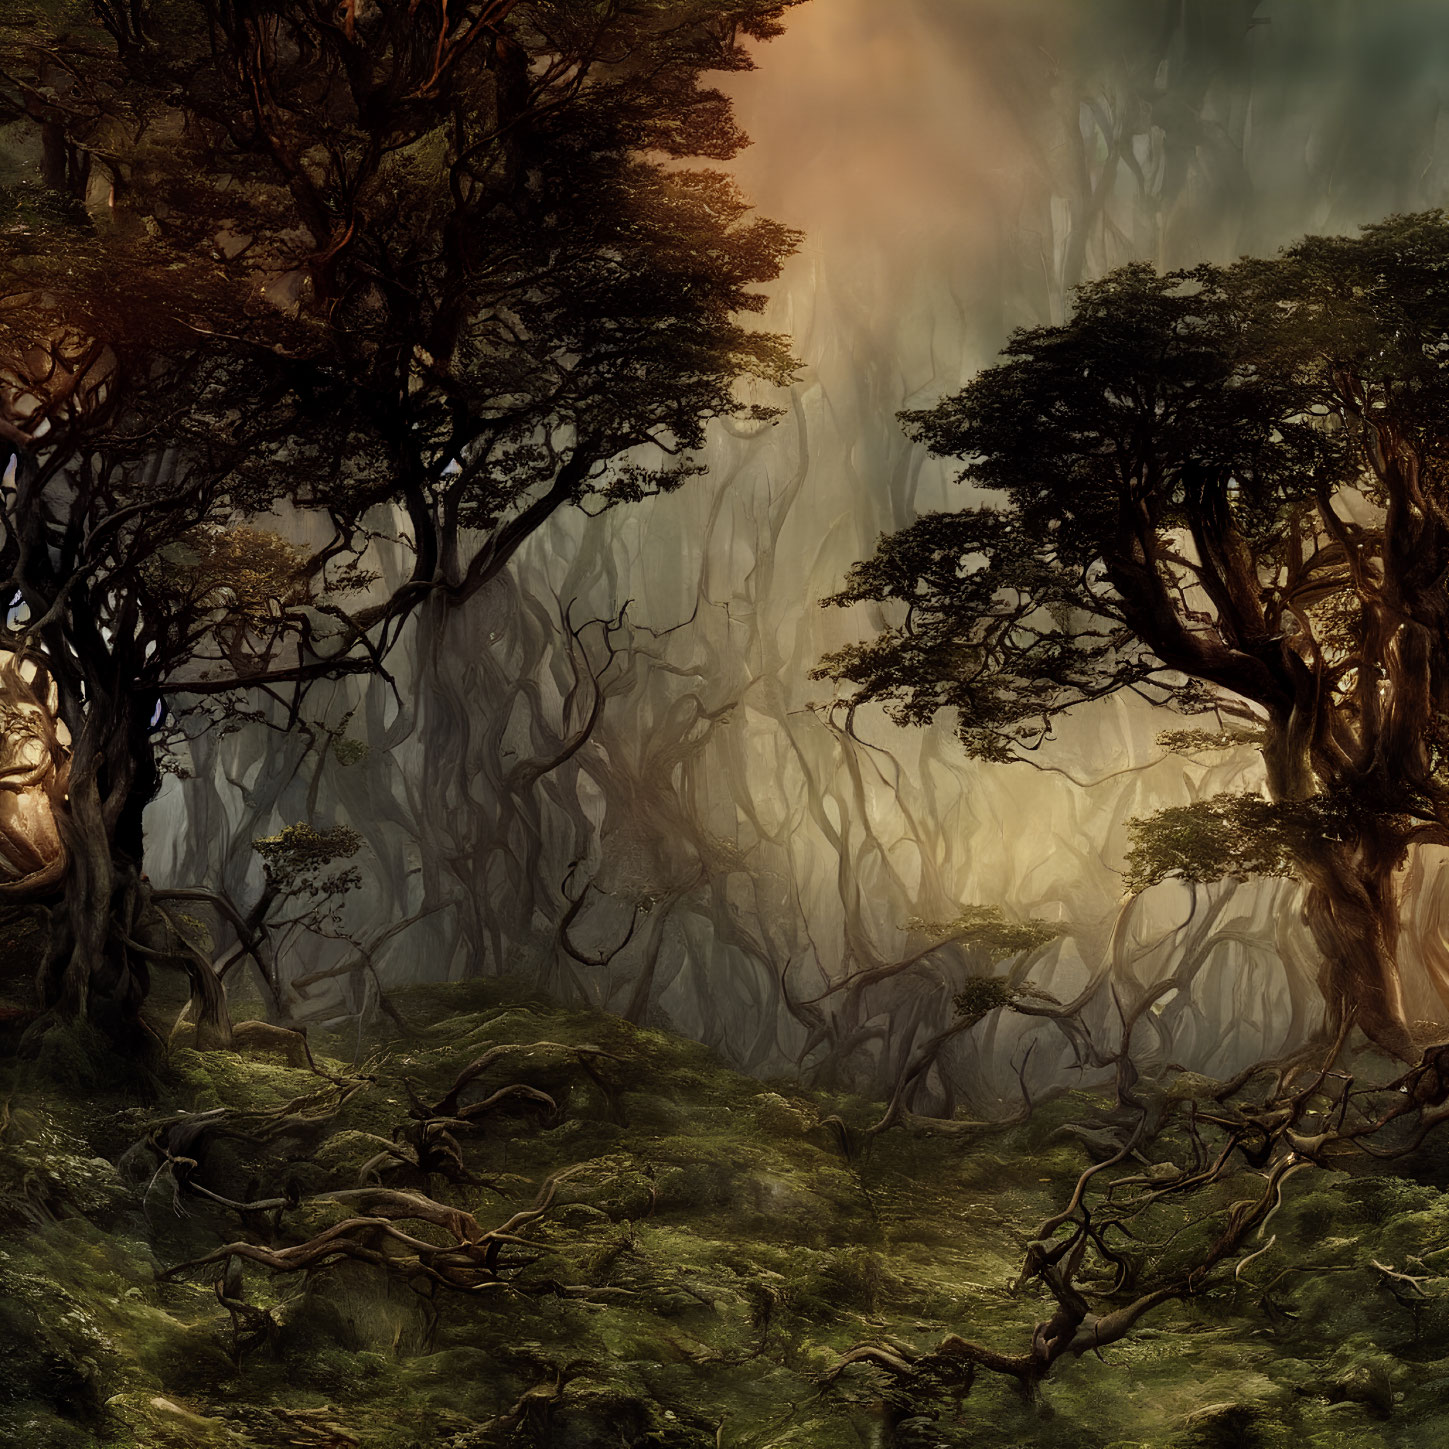 Ethereal forest scene with ancient, gnarled trees in soft mist.